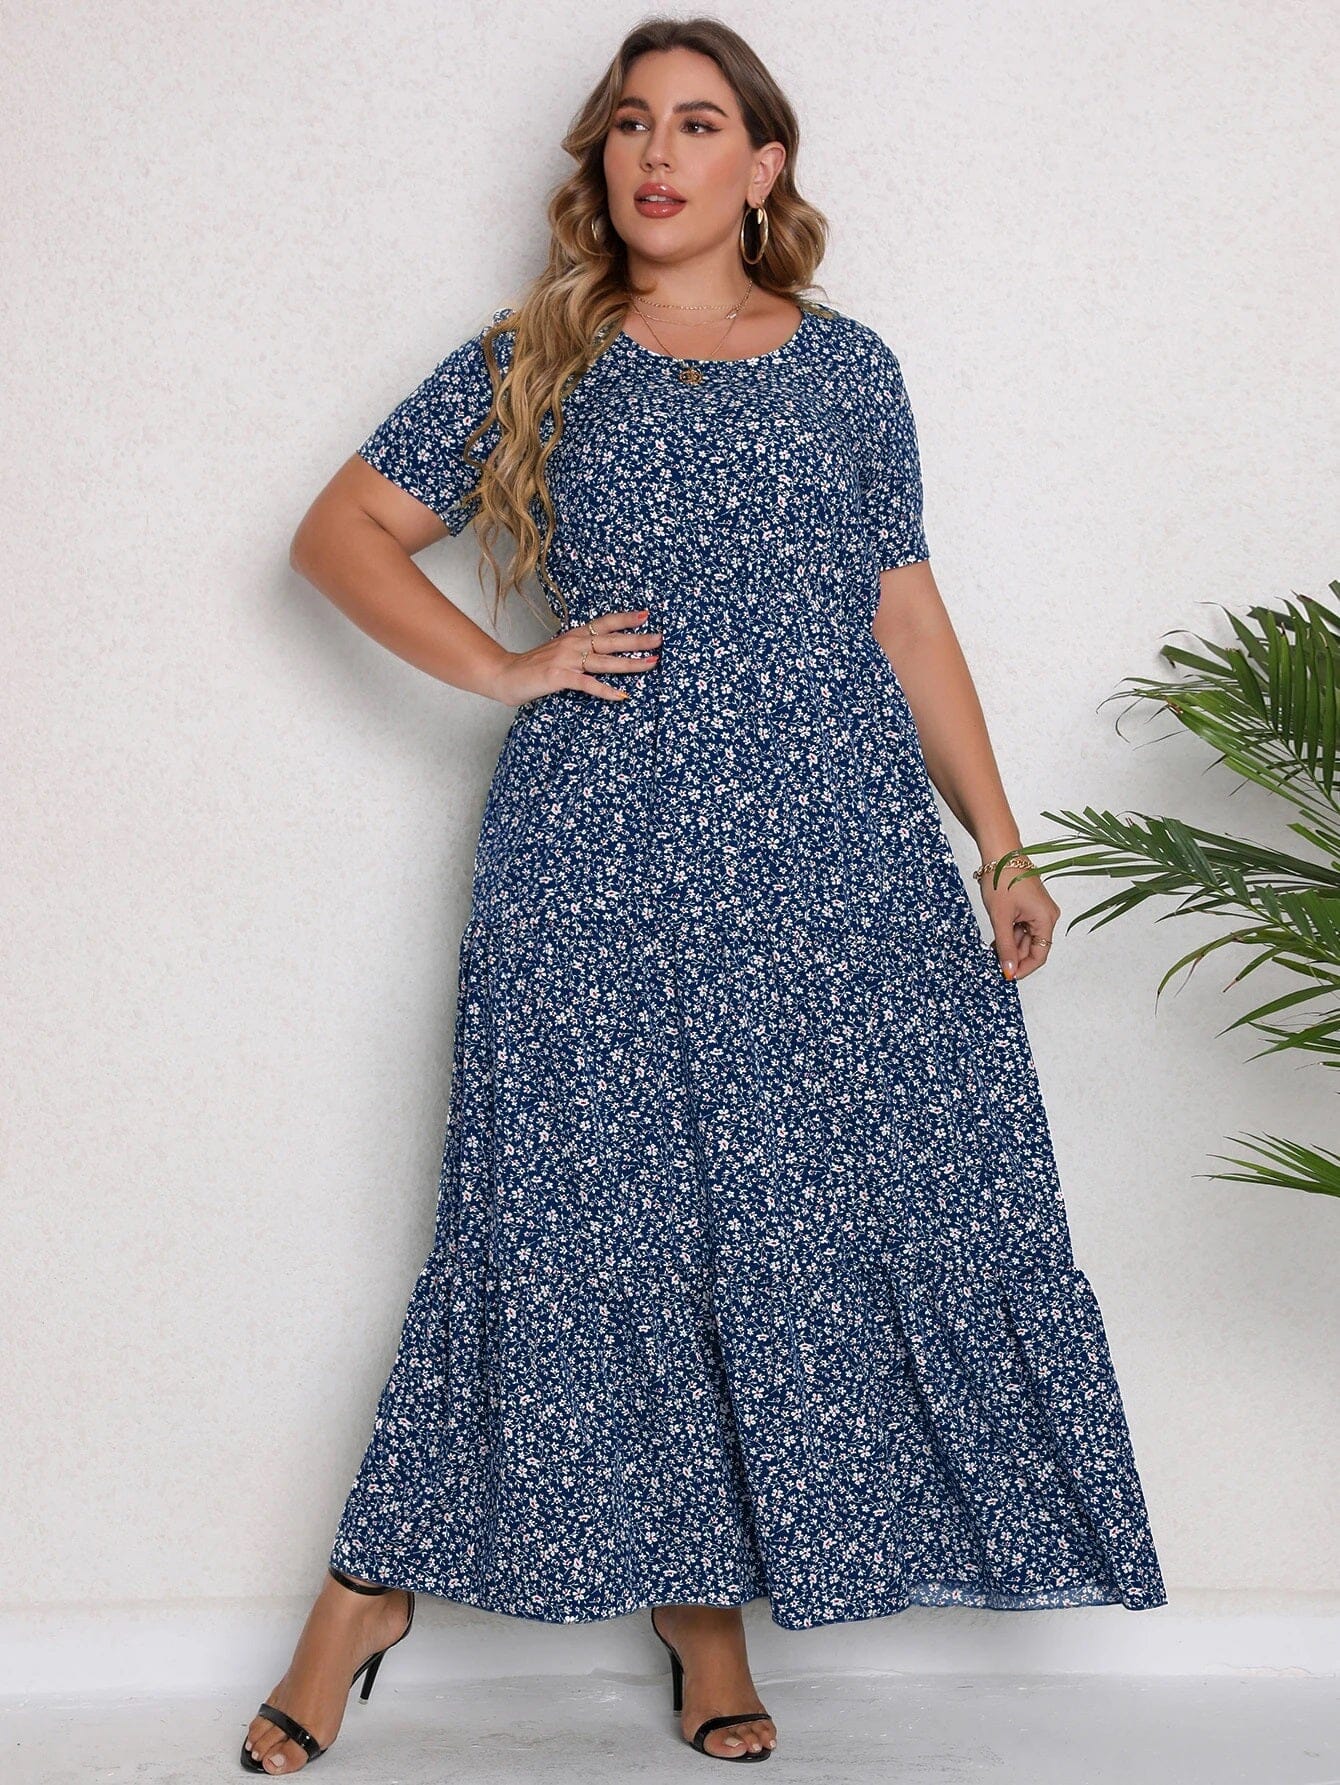 Women Plus Size Casual Flowy Holiday Beach Loose Short Sleeve Ditsy Printed Dress Dresses jehouze Blue XL 